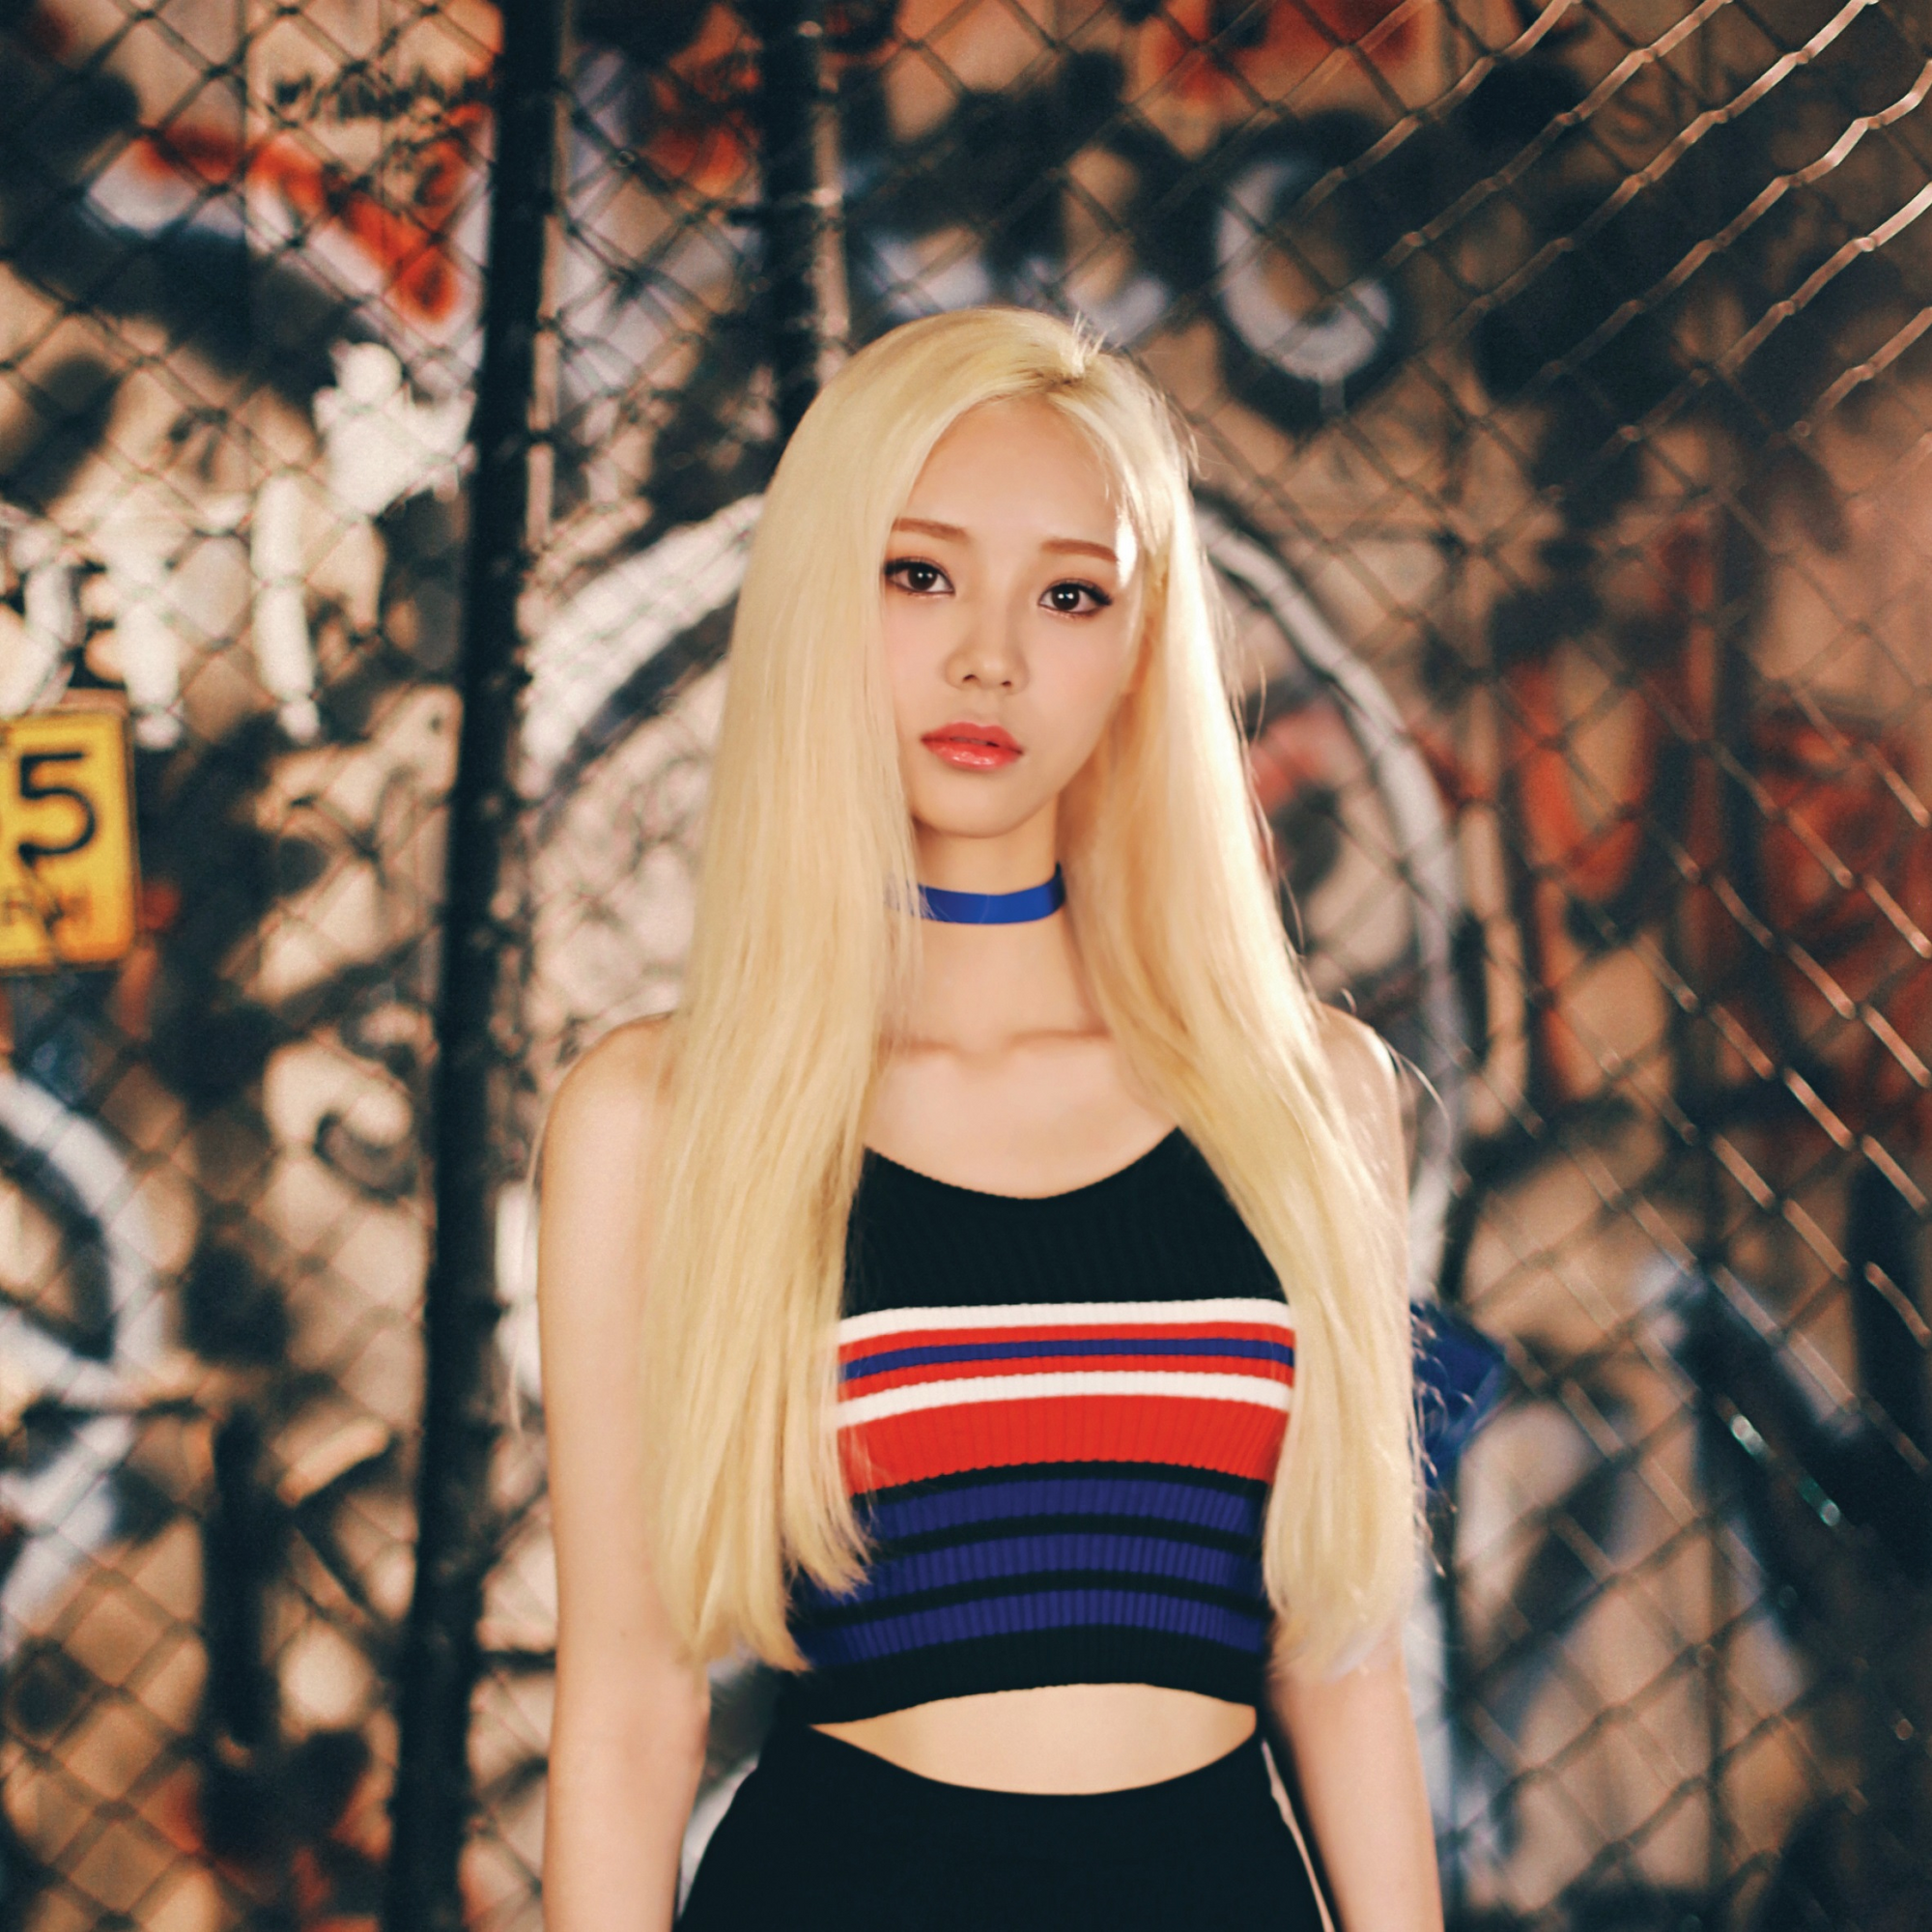 Image - LOONA JinSoul debut photo 6.png | Kpop Wiki | FANDOM powered by